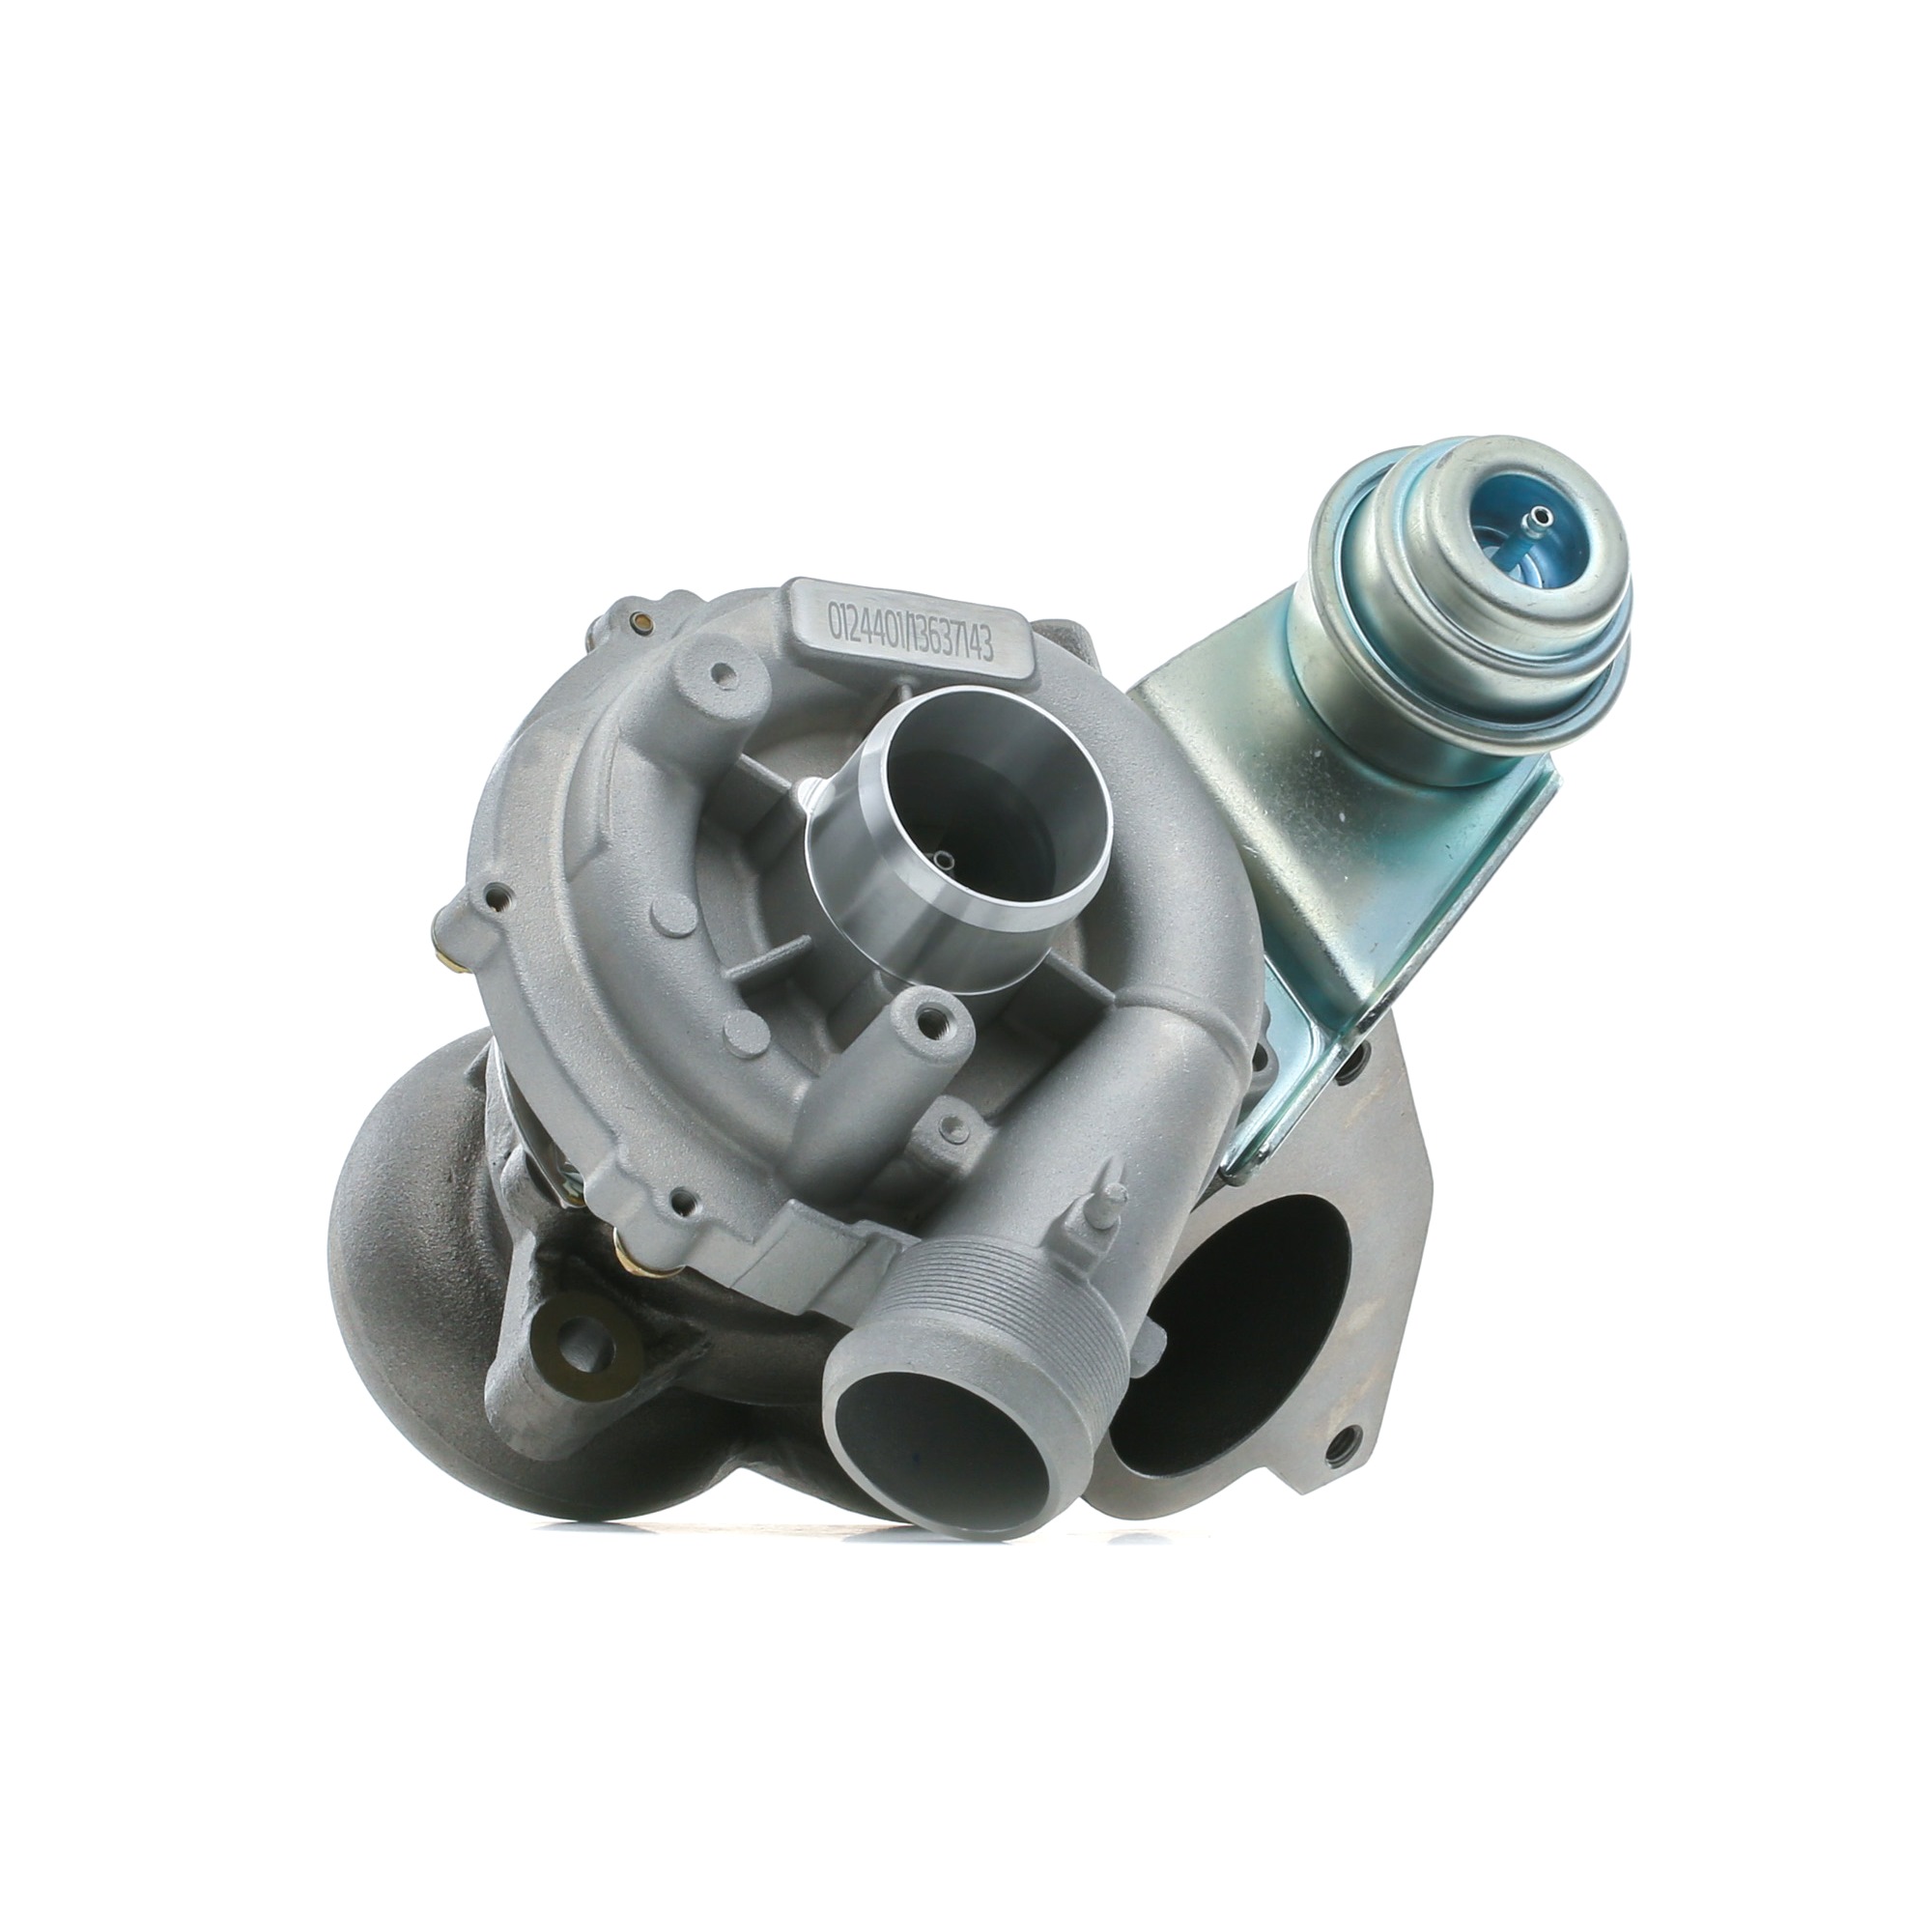 STARK SKCT-1190107 Turbocharger Exhaust Turbocharger, Air cooled, Vacuum-controlled, with gaskets/seals, without attachment material, Steel, Aluminium